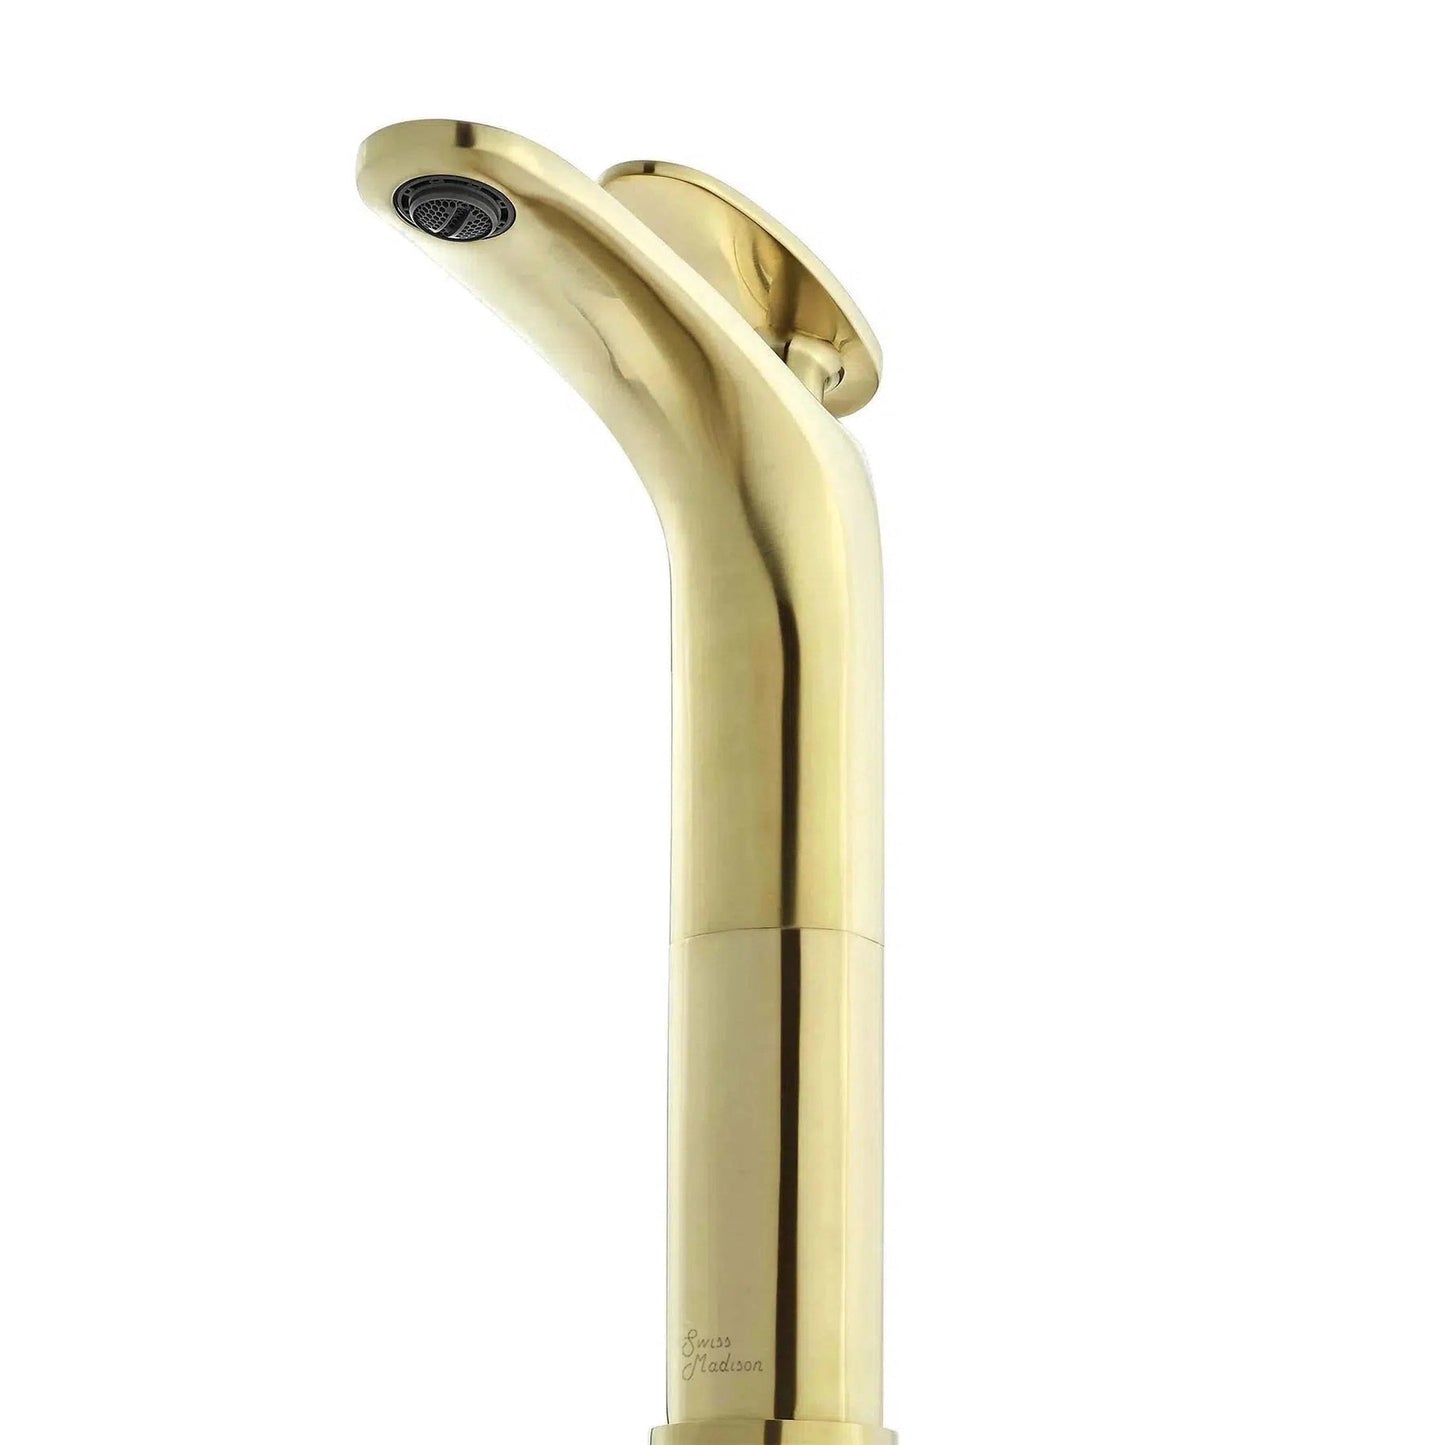 Swiss Madison Sublime 11" Brushed Gold Single Hole Bathroom Faucet With Flow Rate of 1.2 GPM